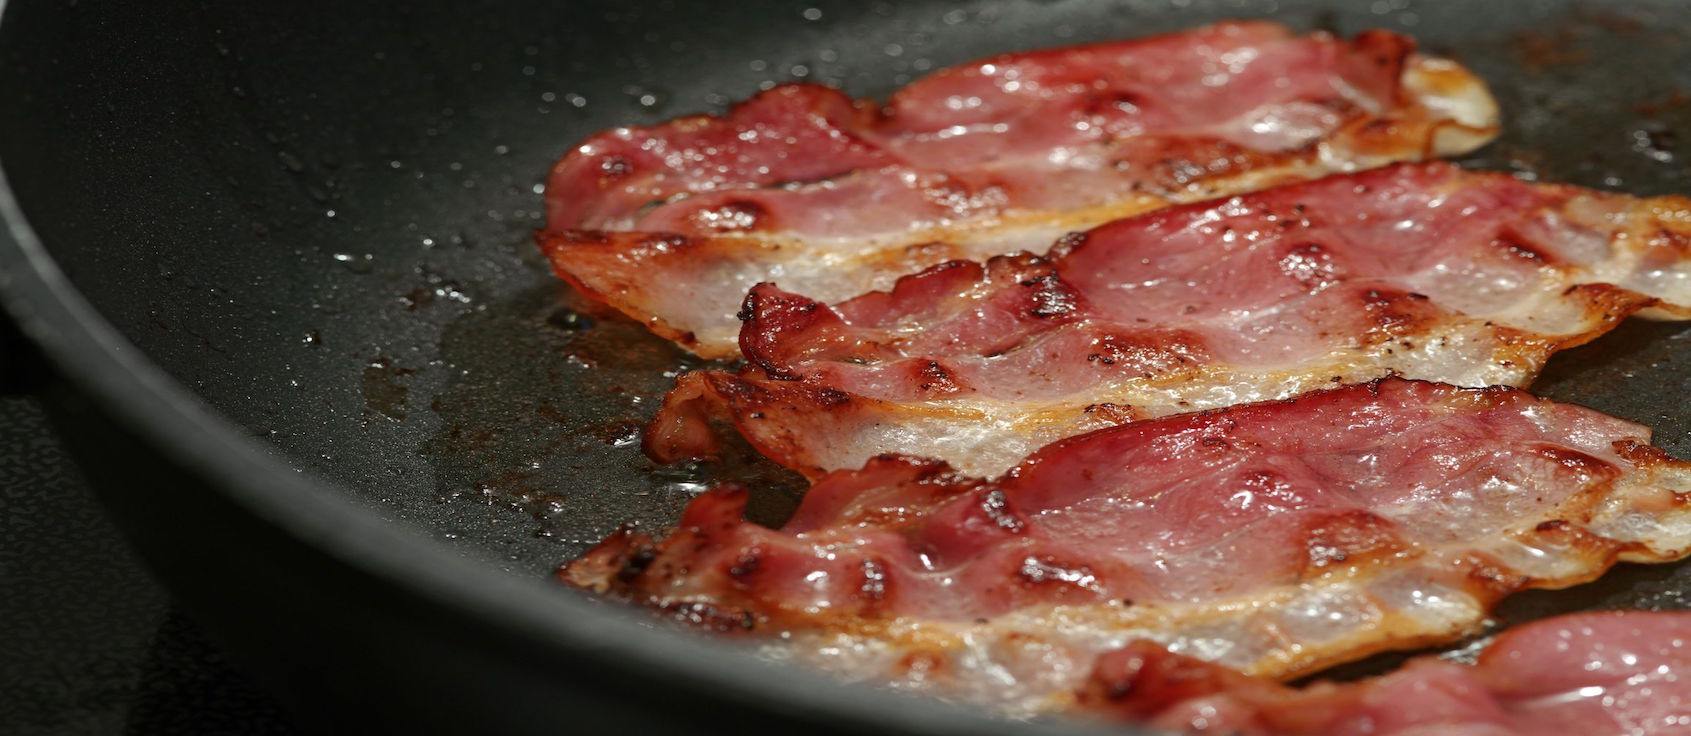 Bacon being fried in a pan.